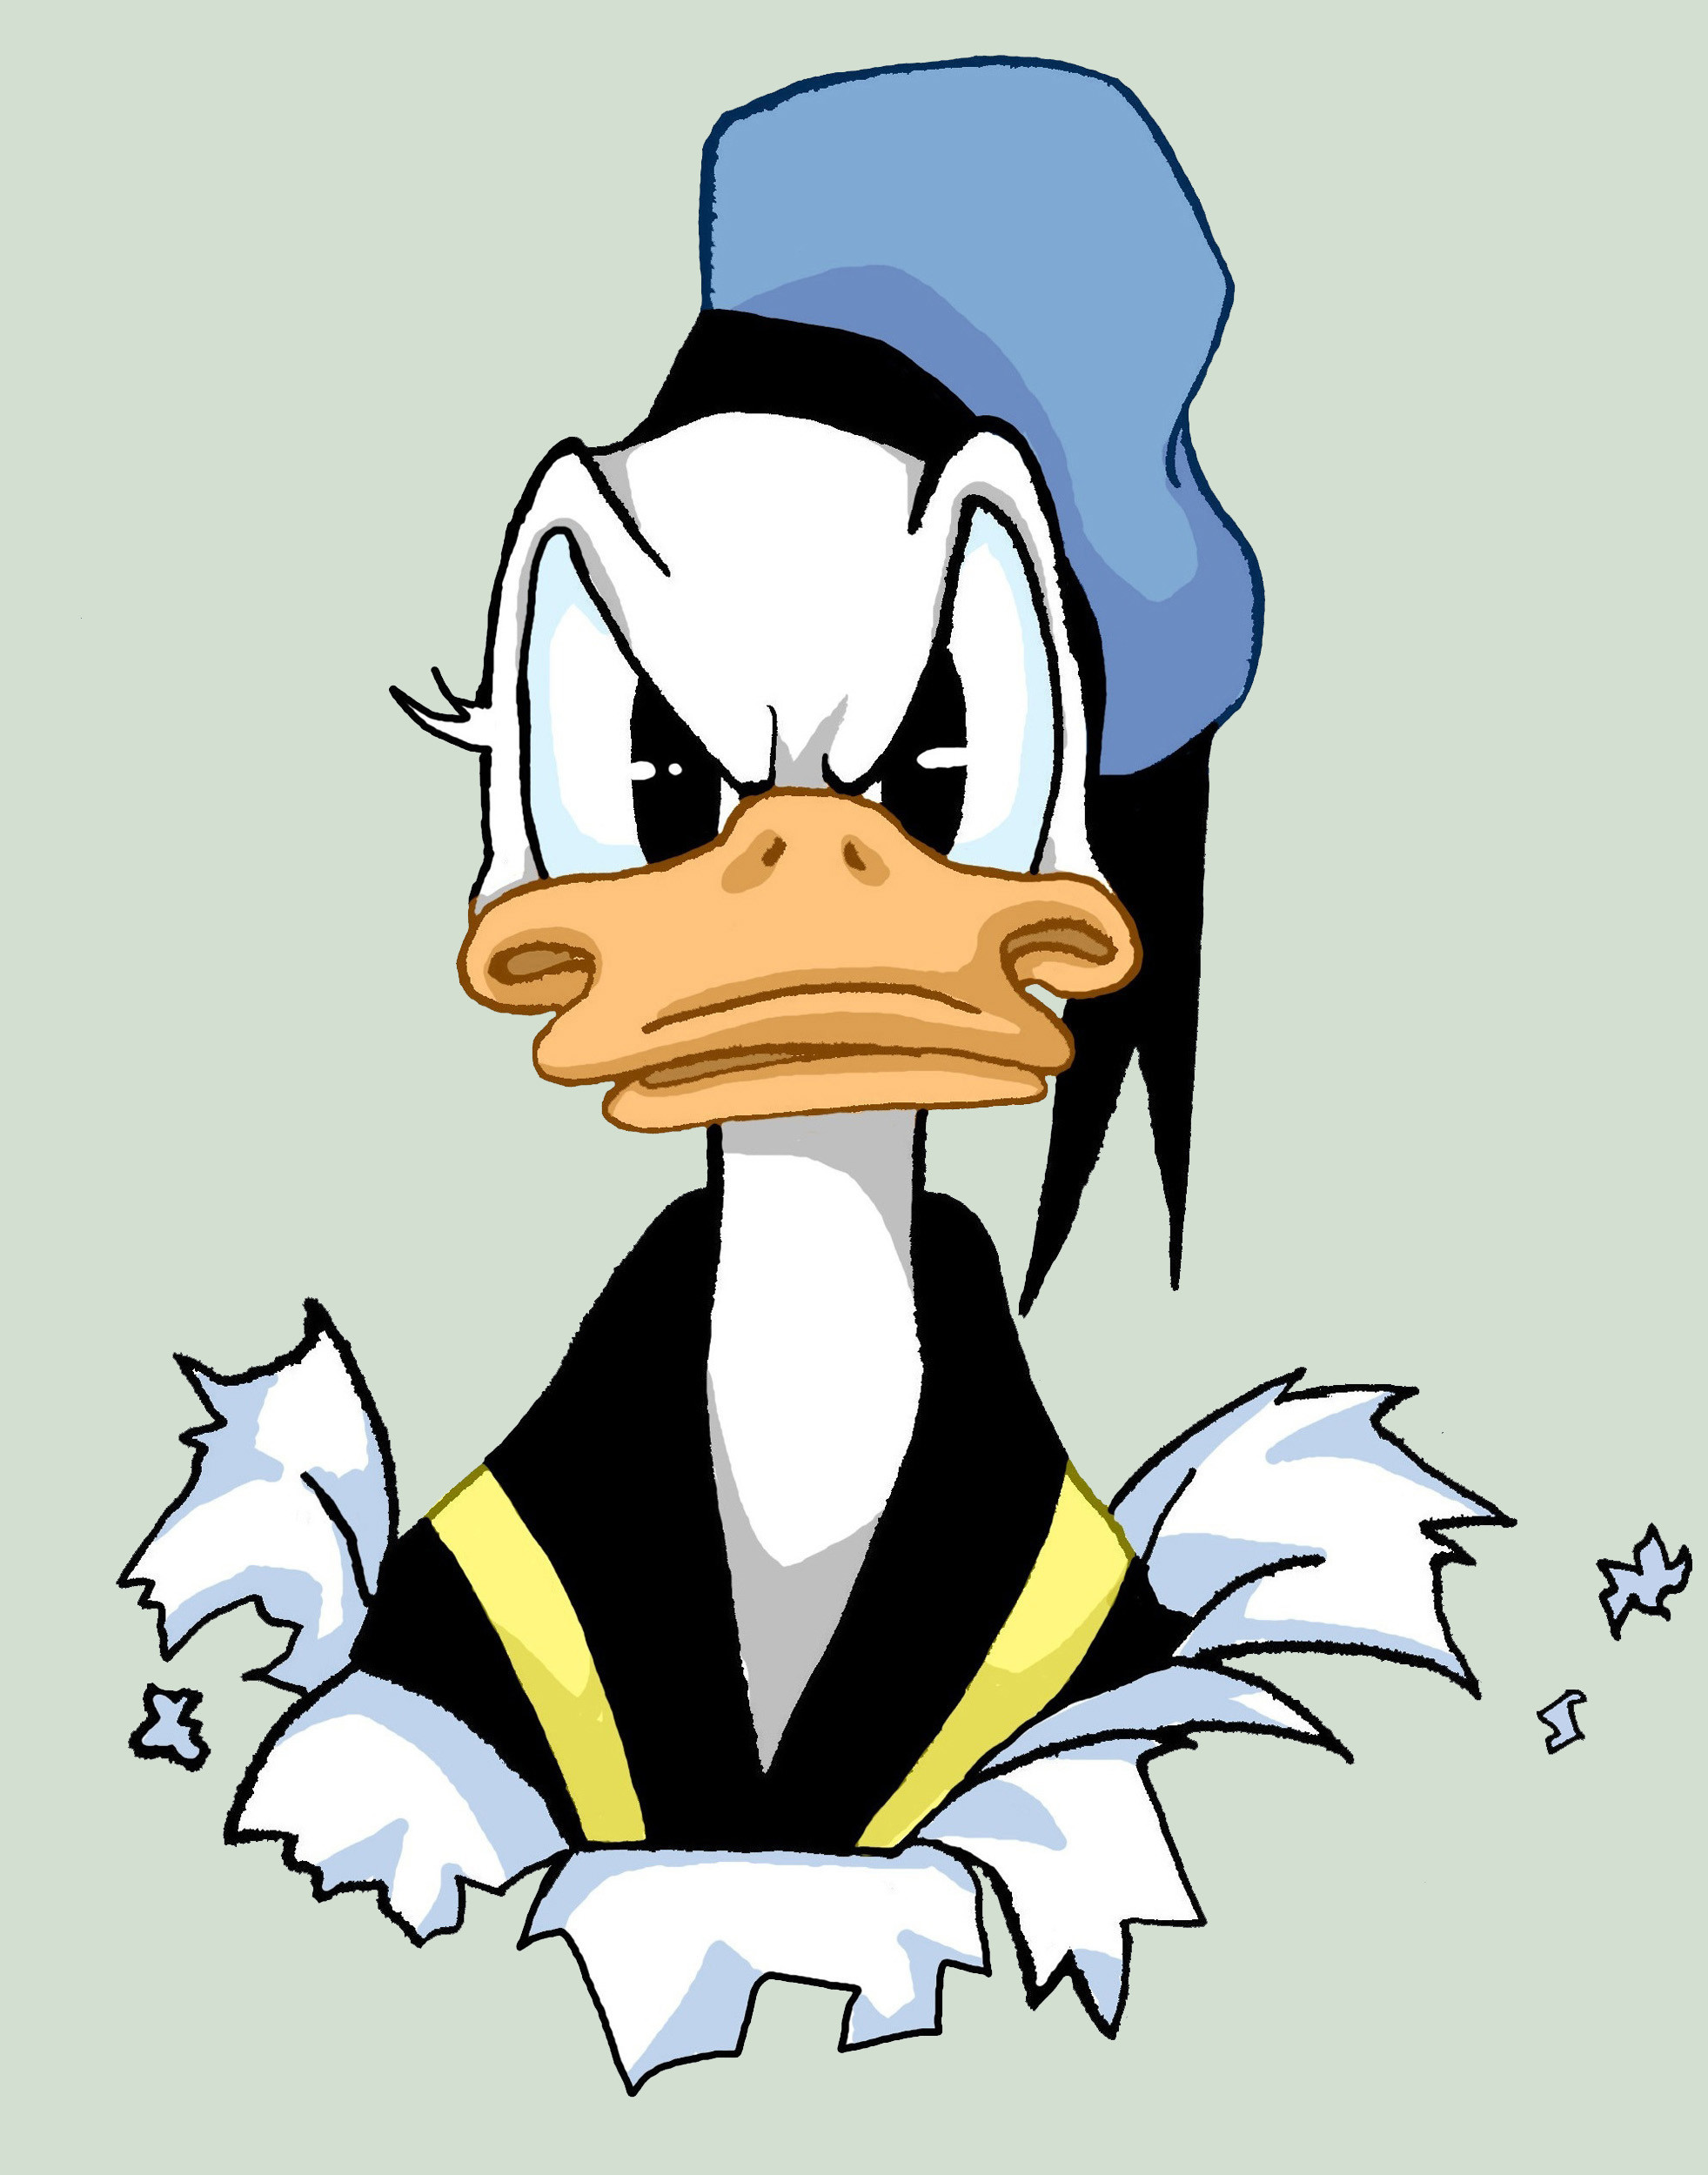 1963x2500 Donald duck full episodes new 2015 Episodes Utimate Classic Collection  Cartoon HD it's has Donald Duck